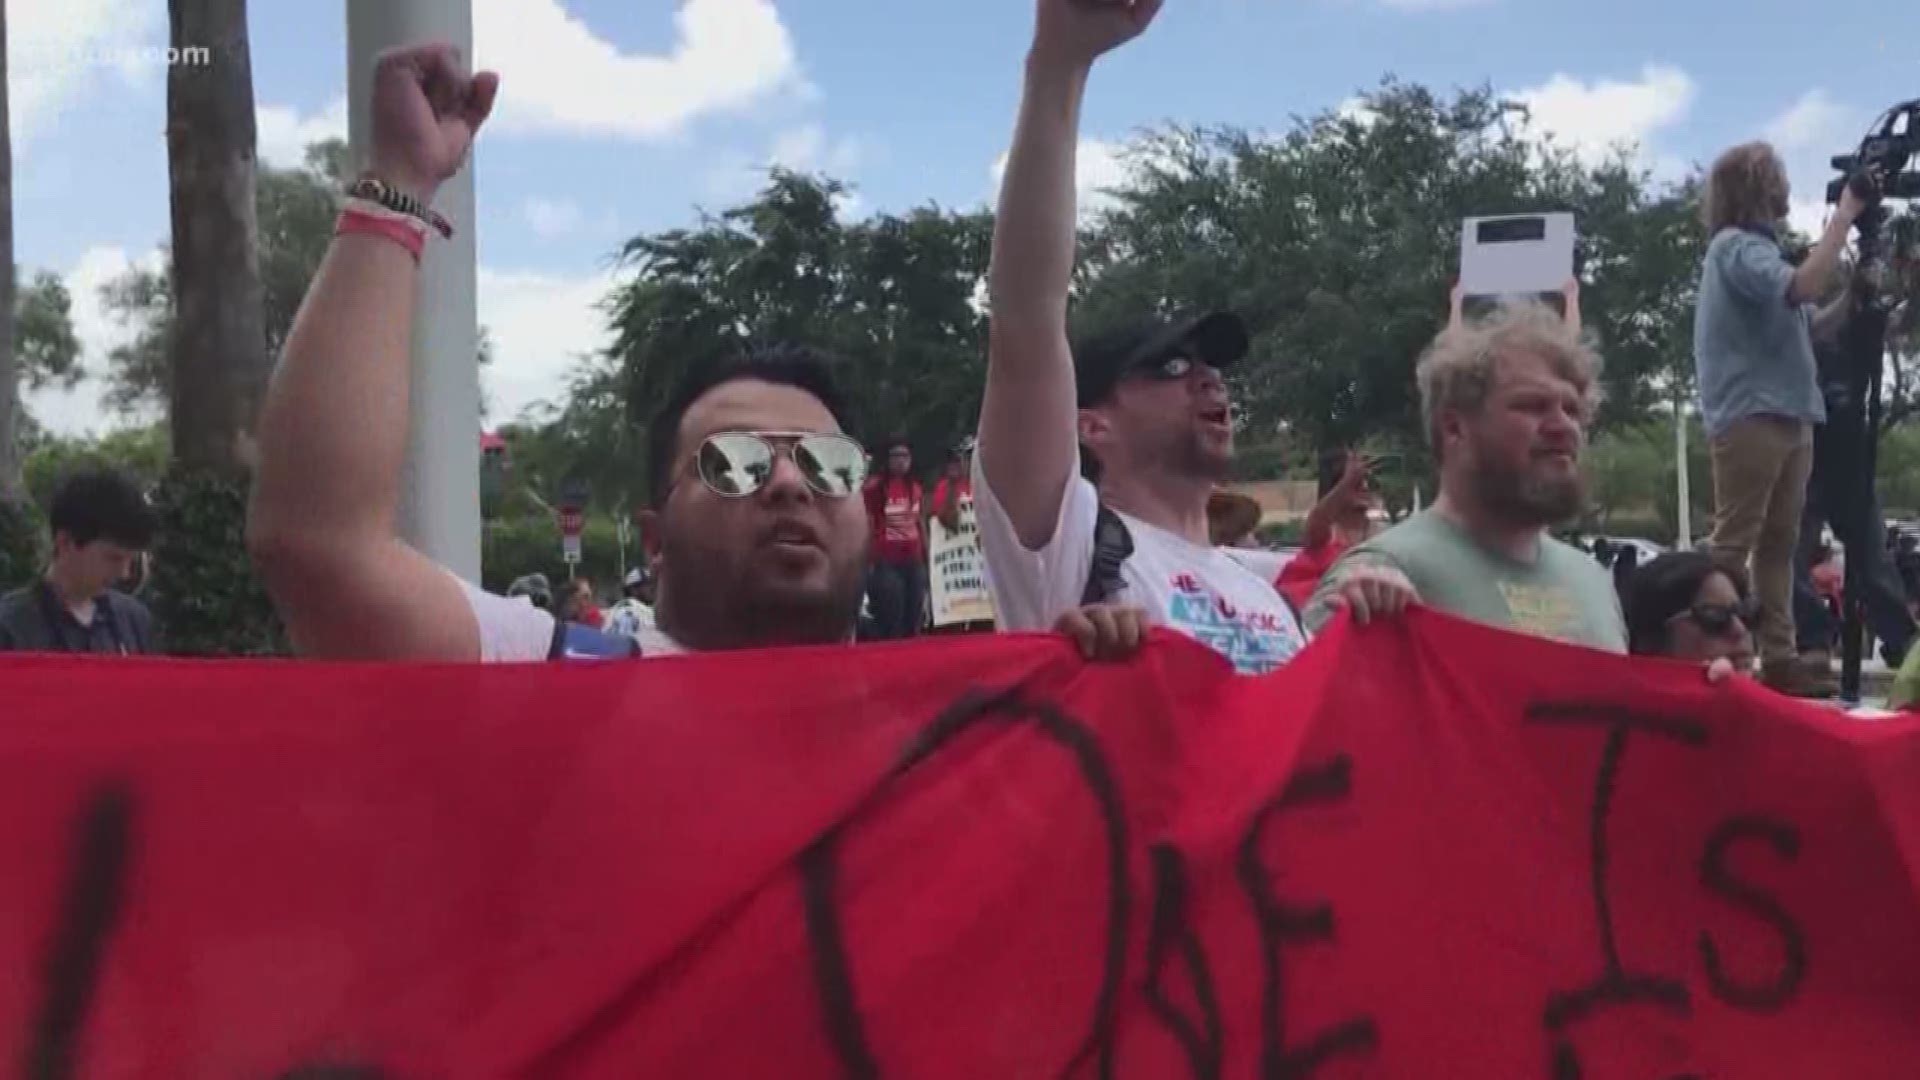 Protesters from across Texas rallied at a border federal courthouse on Thursday demanding reunification of immigrant families and due process for them.